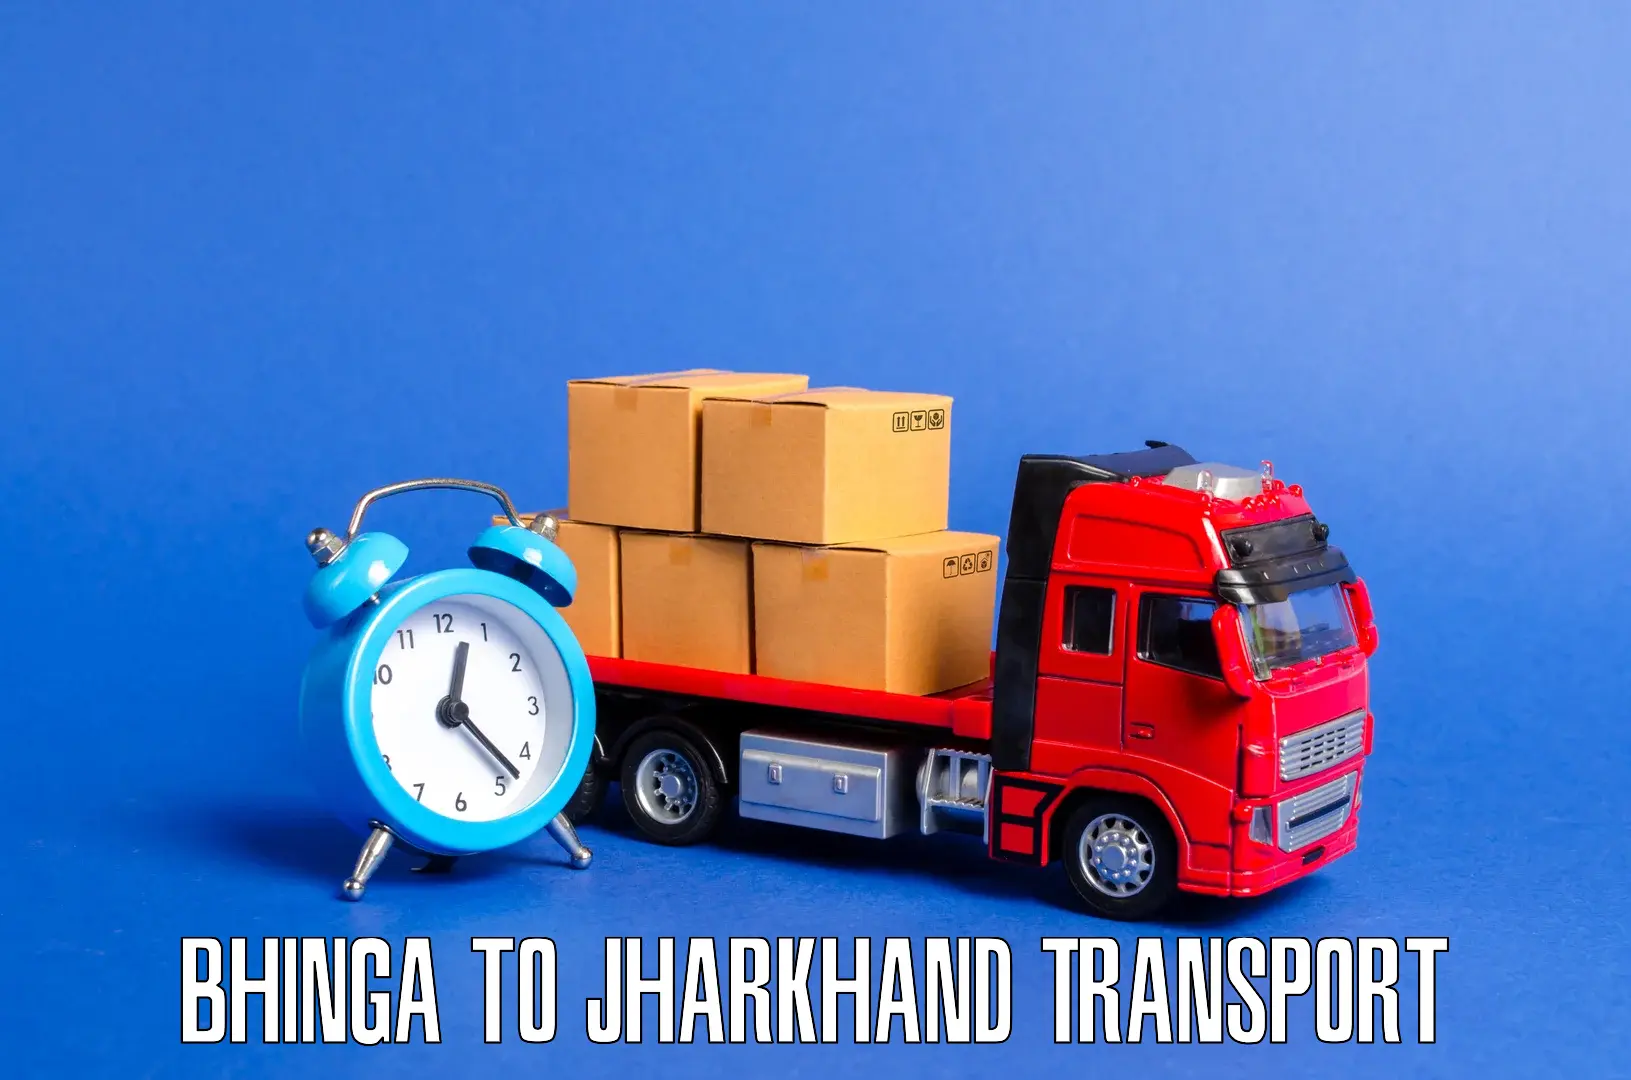 Package delivery services Bhinga to Medininagar